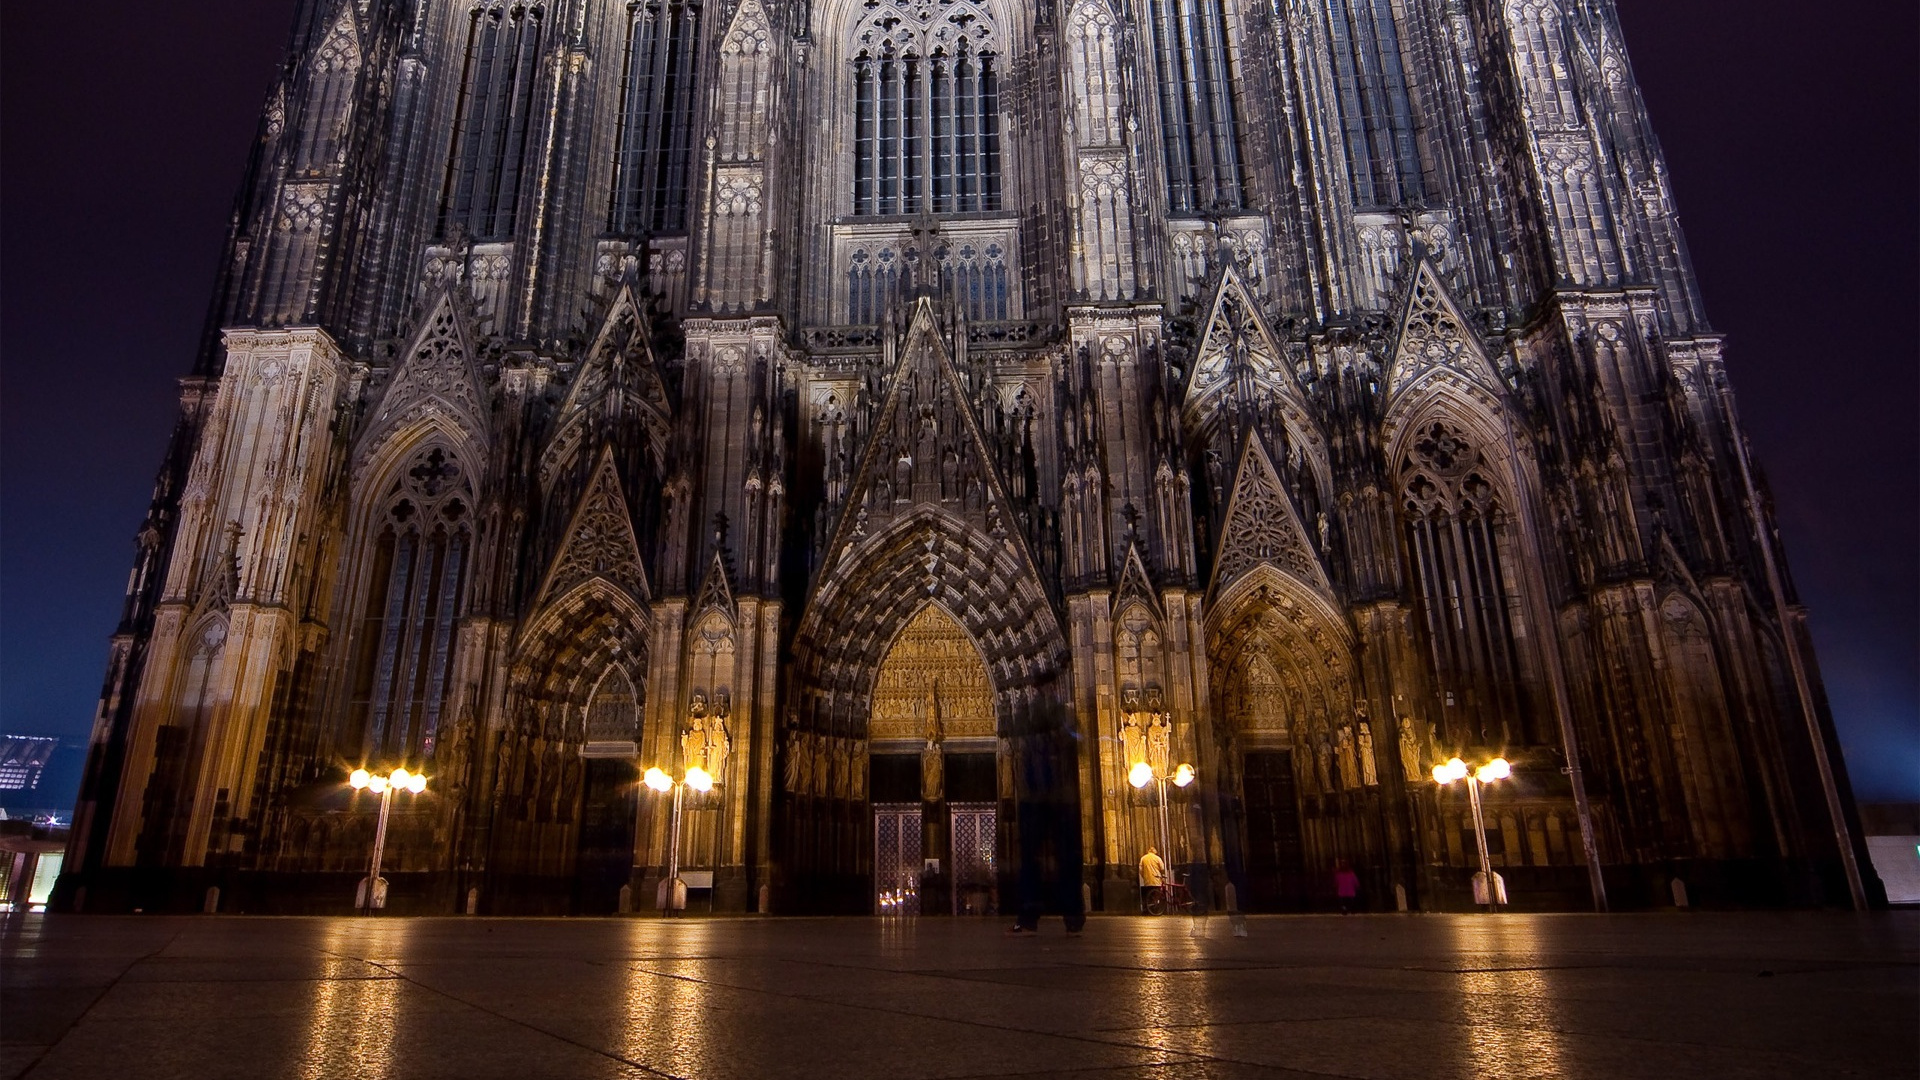 Cologne Cathedral, HD background image, Remarkable structure, Germany's beauty, 1920x1080 Full HD Desktop